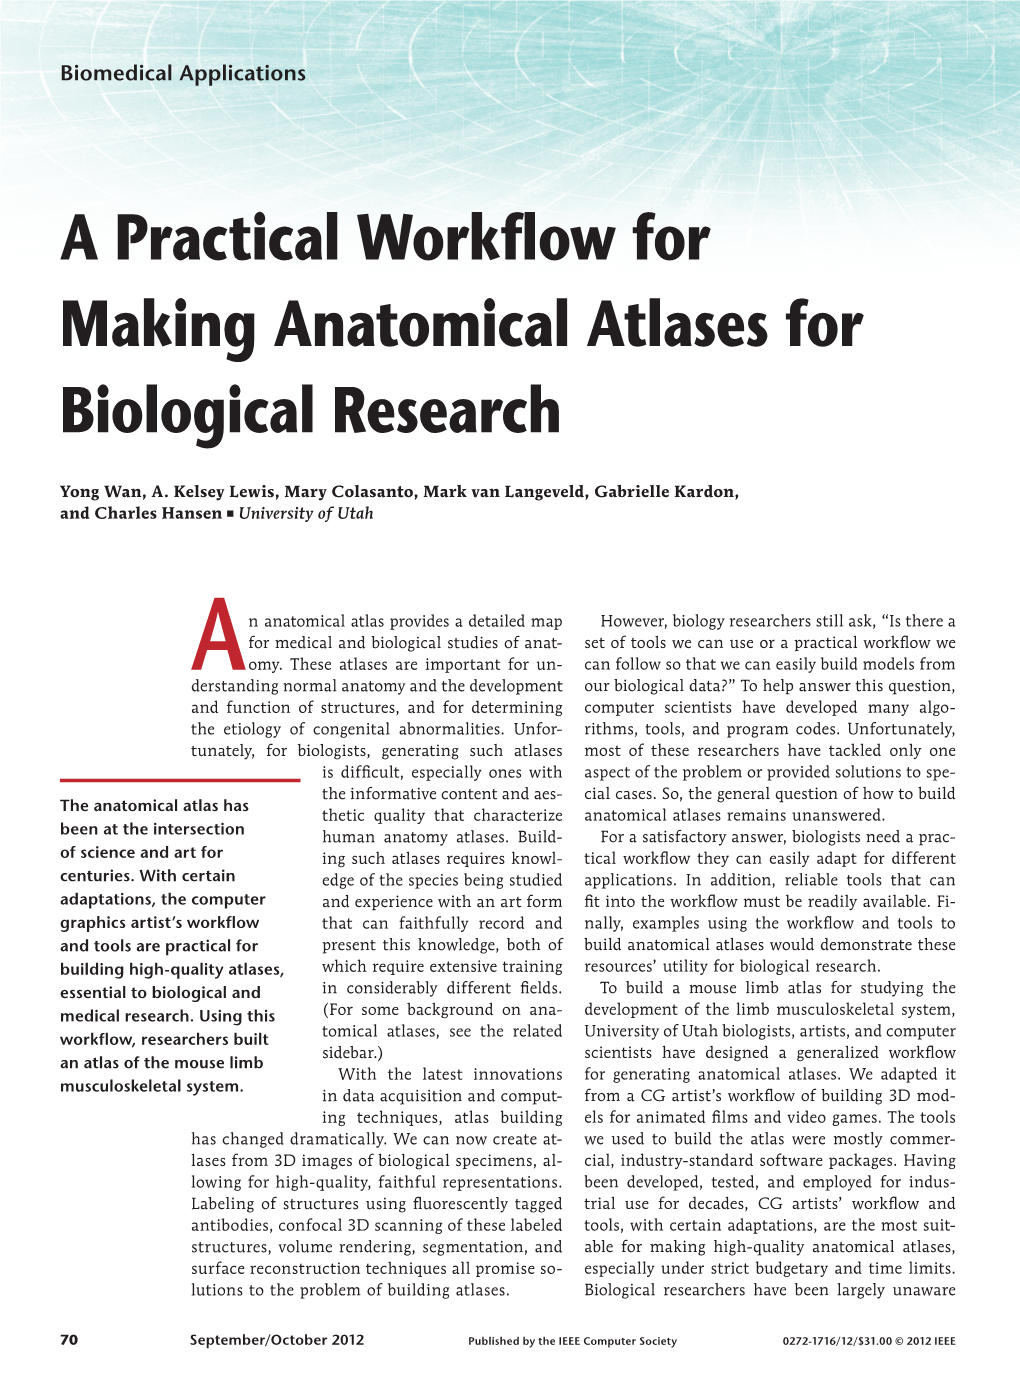 A Practical Workflow for Making Anatomical Atlases for Biological Research